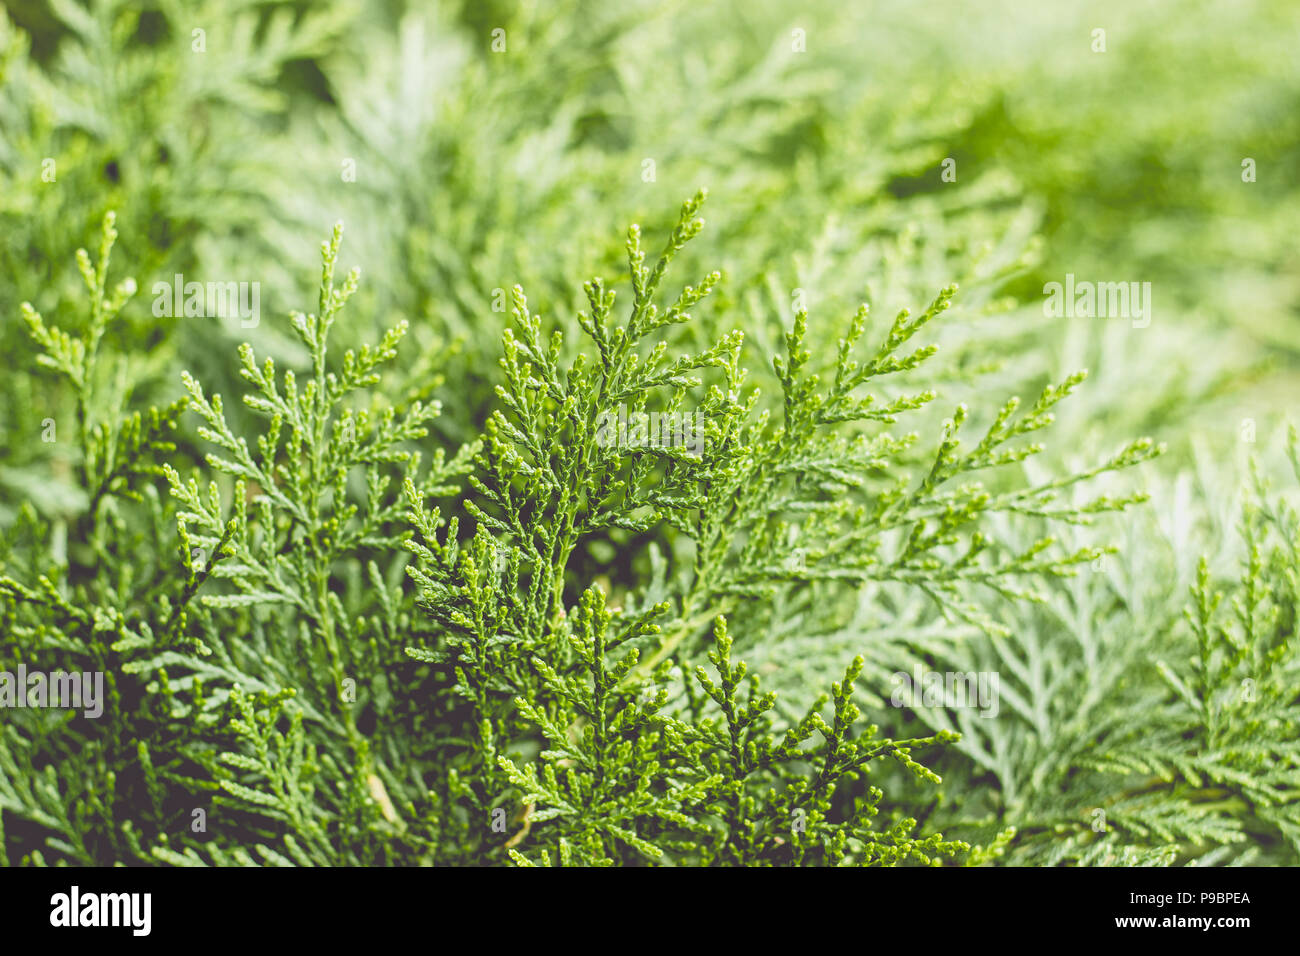 Close up of a branch of thuja tree; nature background Stock Photo